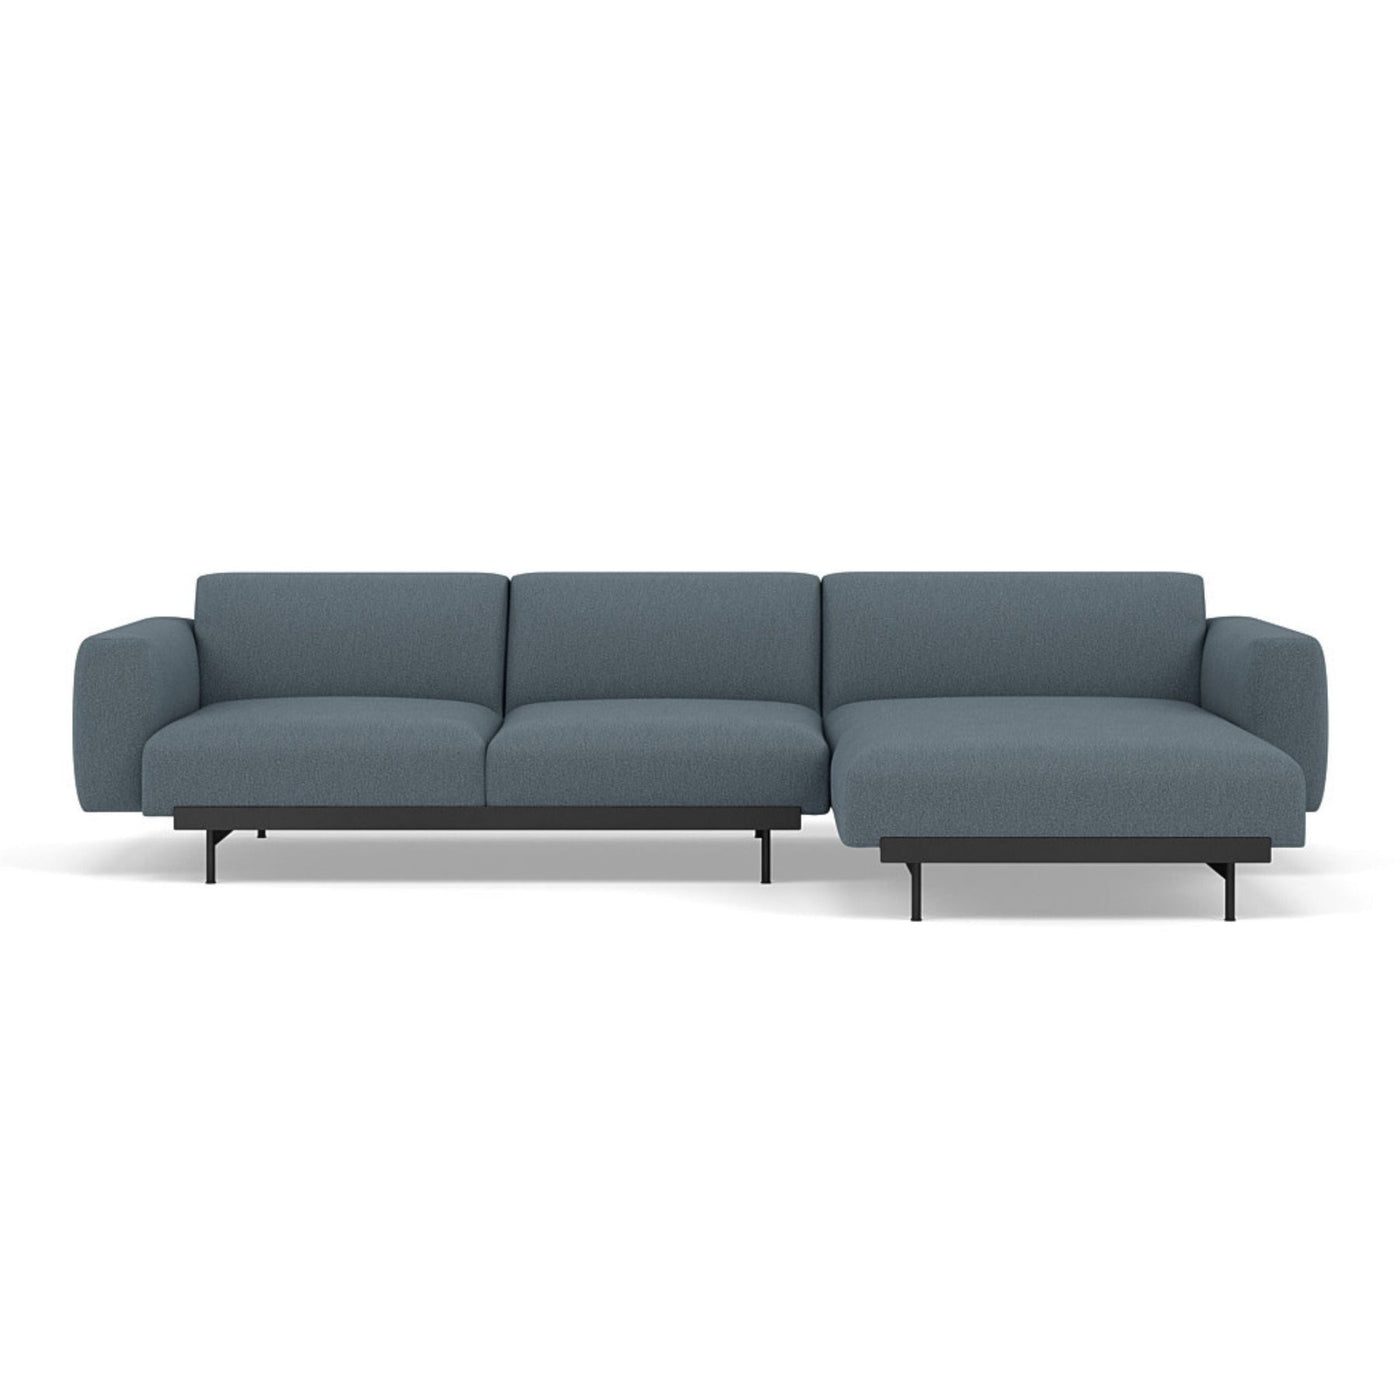 Muuto In Situ Sofa 3 seater configuration 1 in clay 6 fabric. Made to order at someday designs. #colour_clay-1-blue